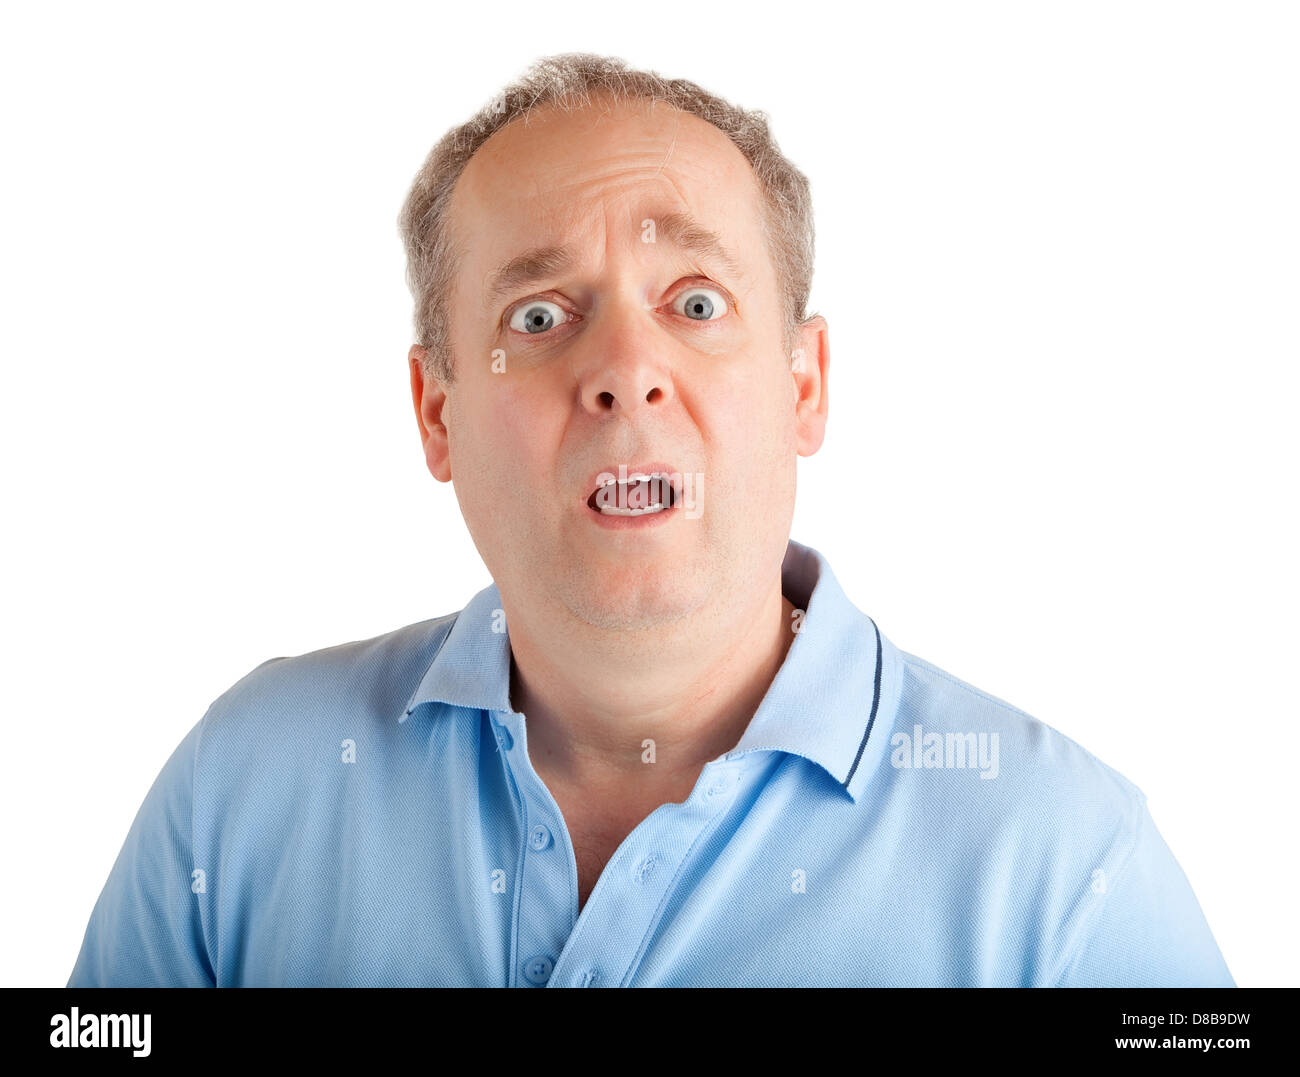 A man appears to be surprised about something. Stock Photo